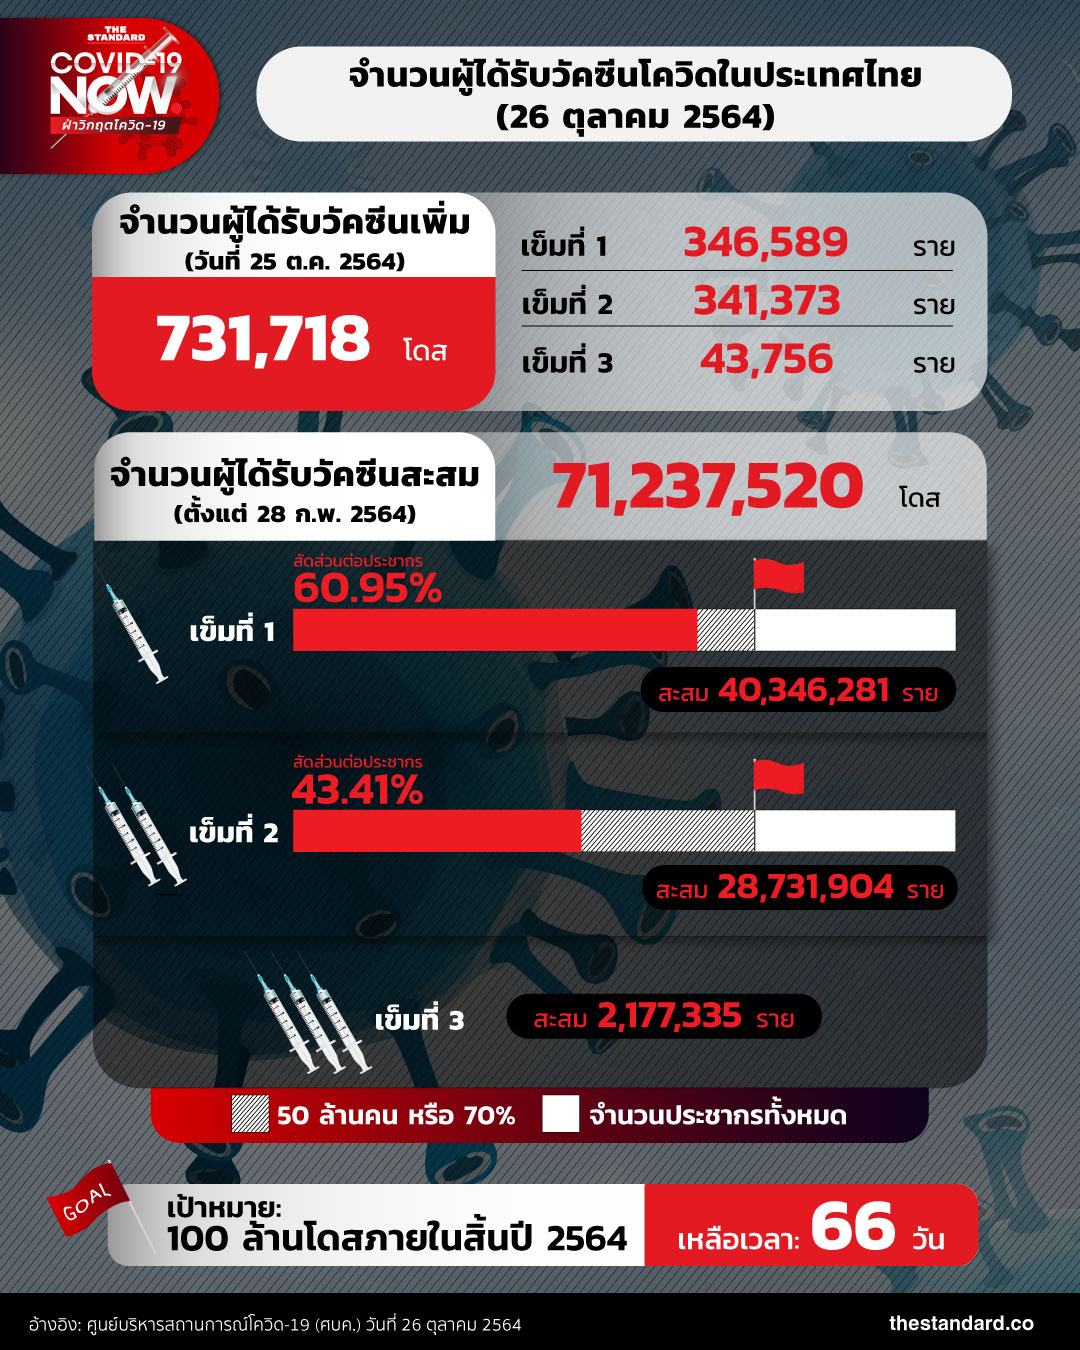 number-of-people-got-covid-19-vaccines-in-thailand-261064